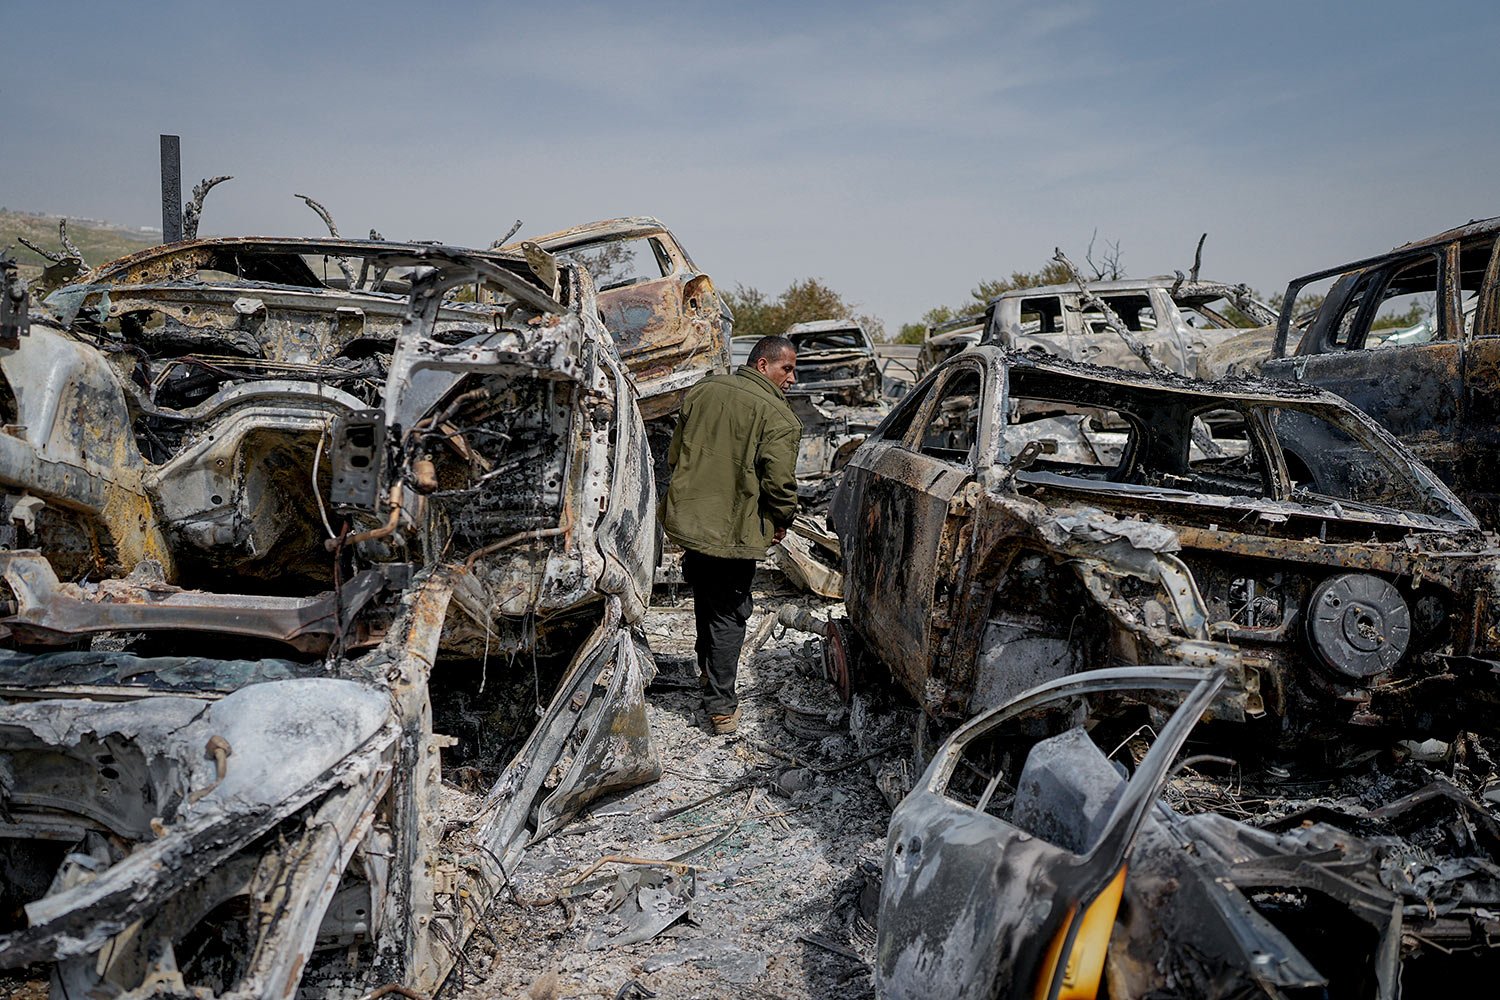  A Palestinian man walks between scorched cars in a scrapyard, in the town of Hawara, near the West Bank city of Nablus, Monday, Feb. 27, 2023.  (AP Photo/Ohad Zwigenberg) 